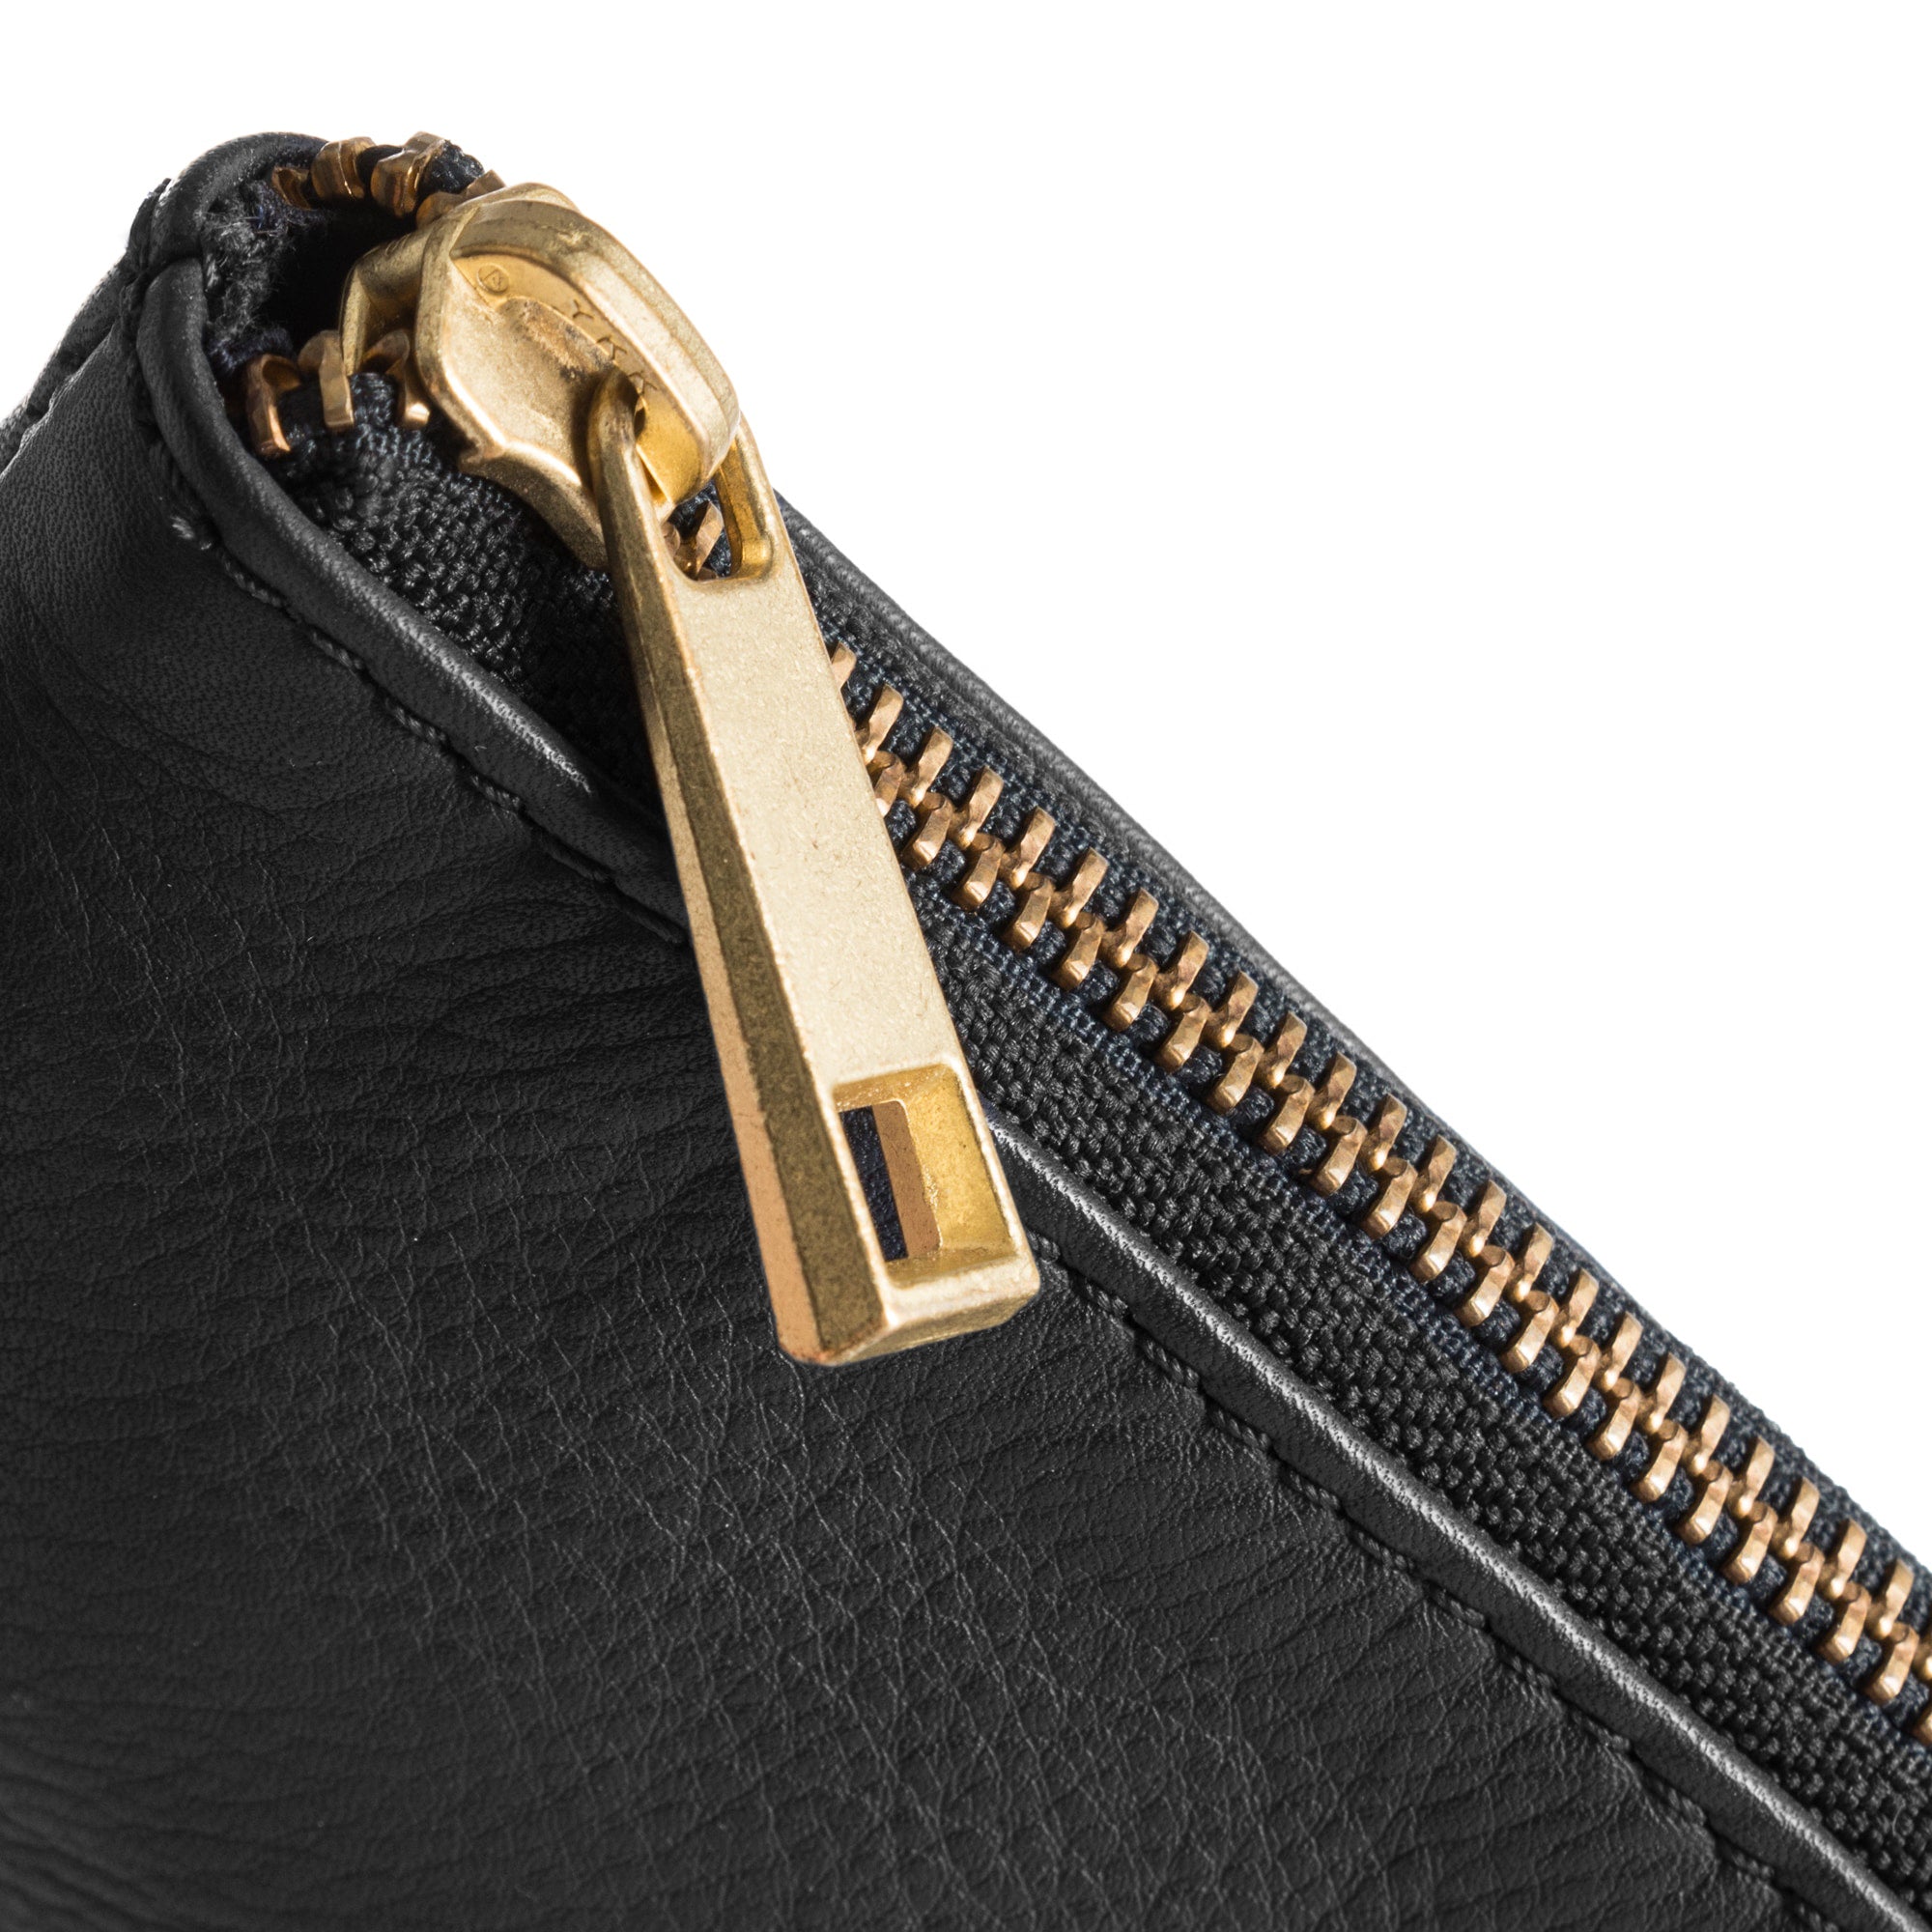 DEPECHE. - Leather bags just never goes out of style